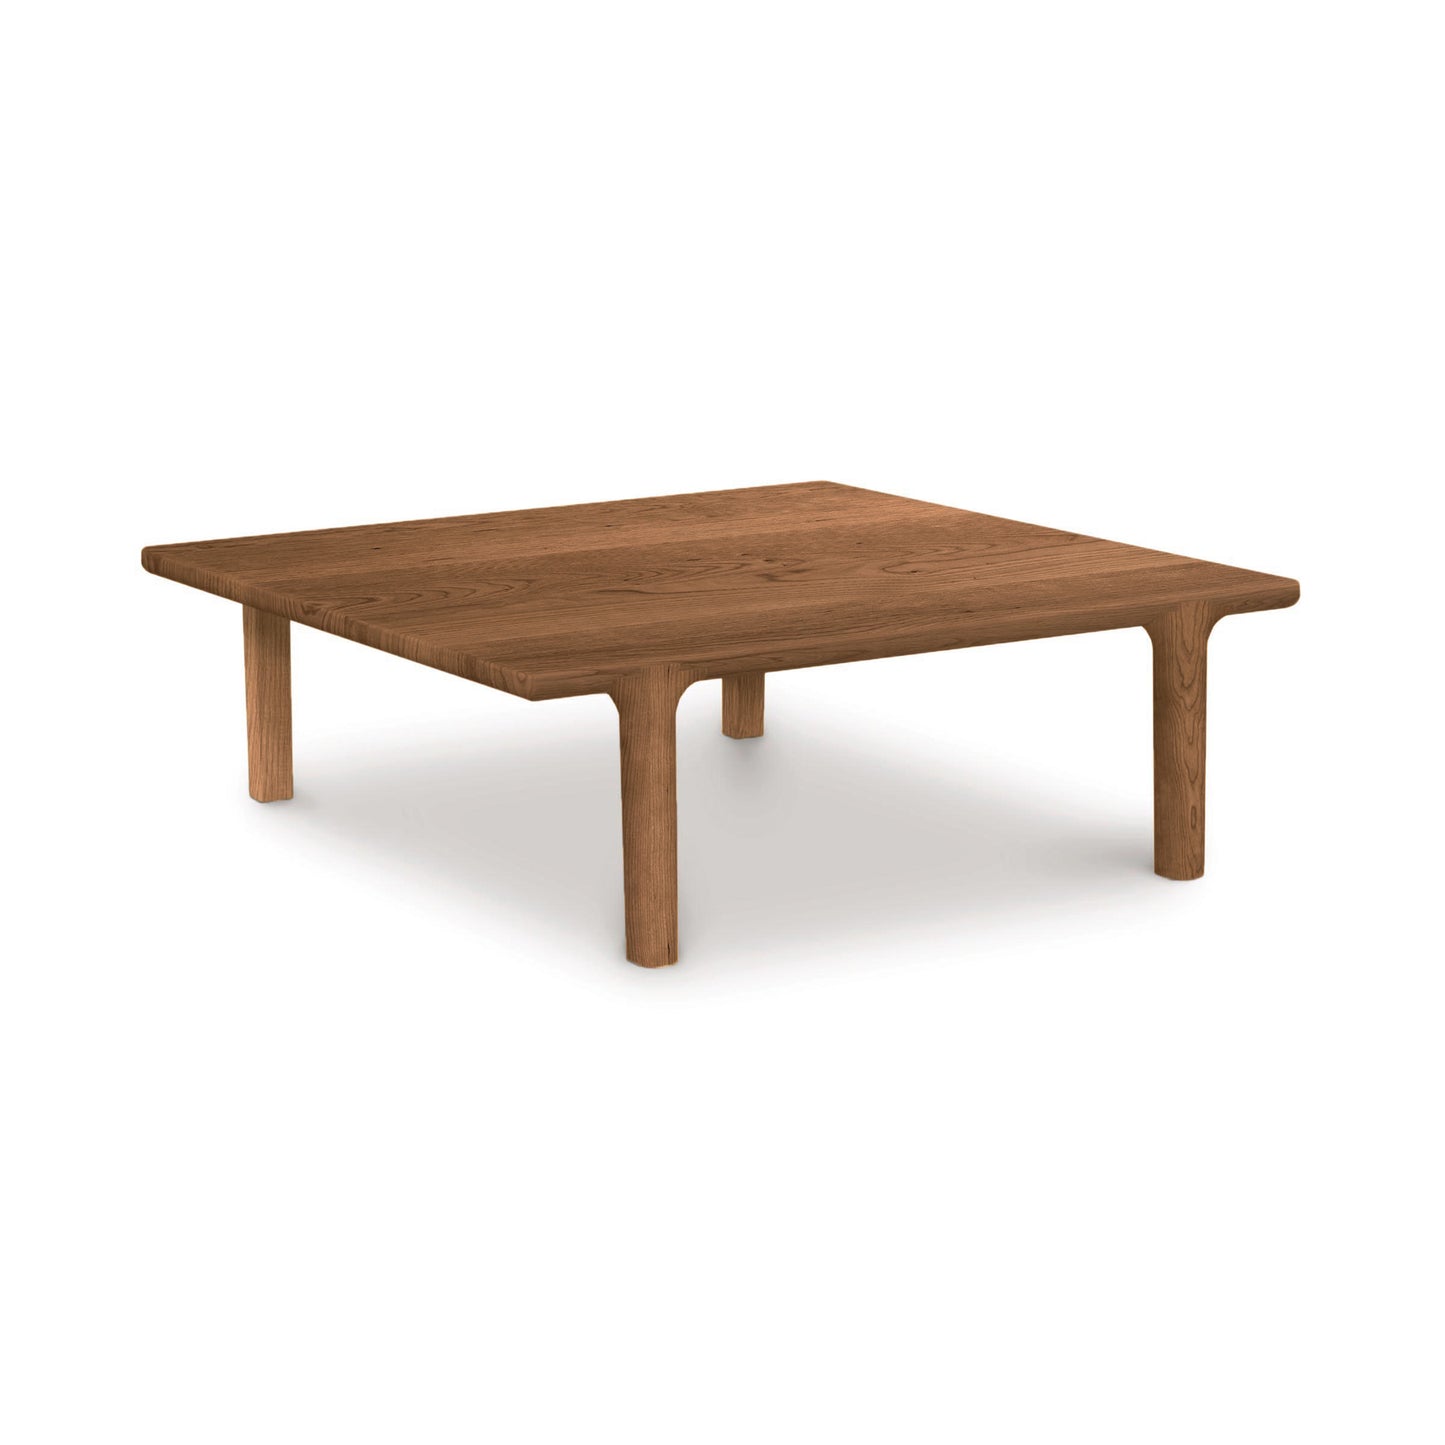 A Sierra Square Coffee Table by Copeland Furniture, with legs and seating capabilities.